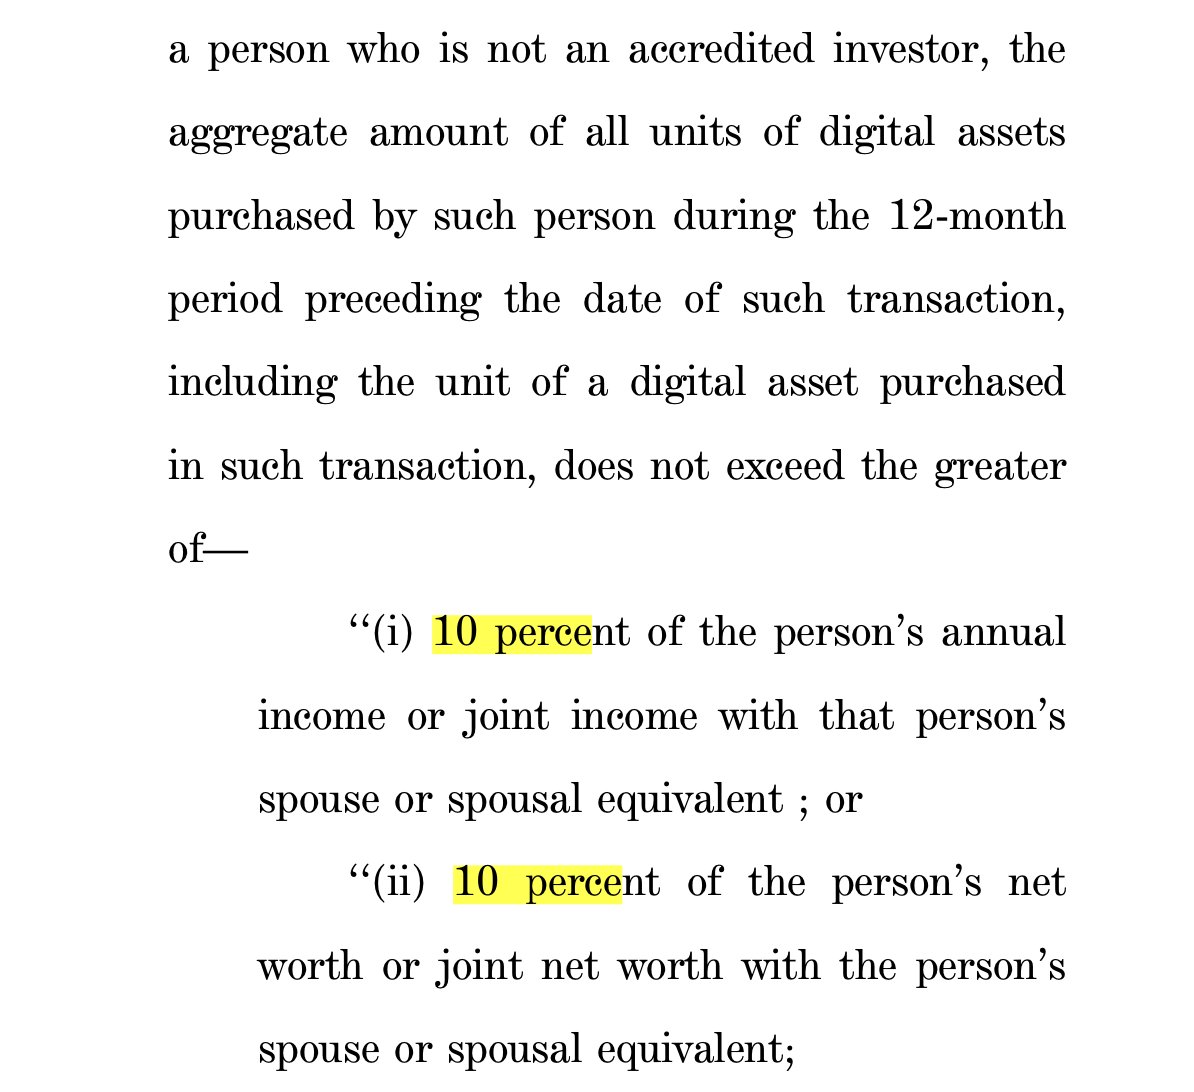 New crypto bill has dropped.

Non-accredited investors will not be able to purchase more than  10% of their household annual income or net worth on digital assets per year.

Do we still want to #FireGensler or nah?